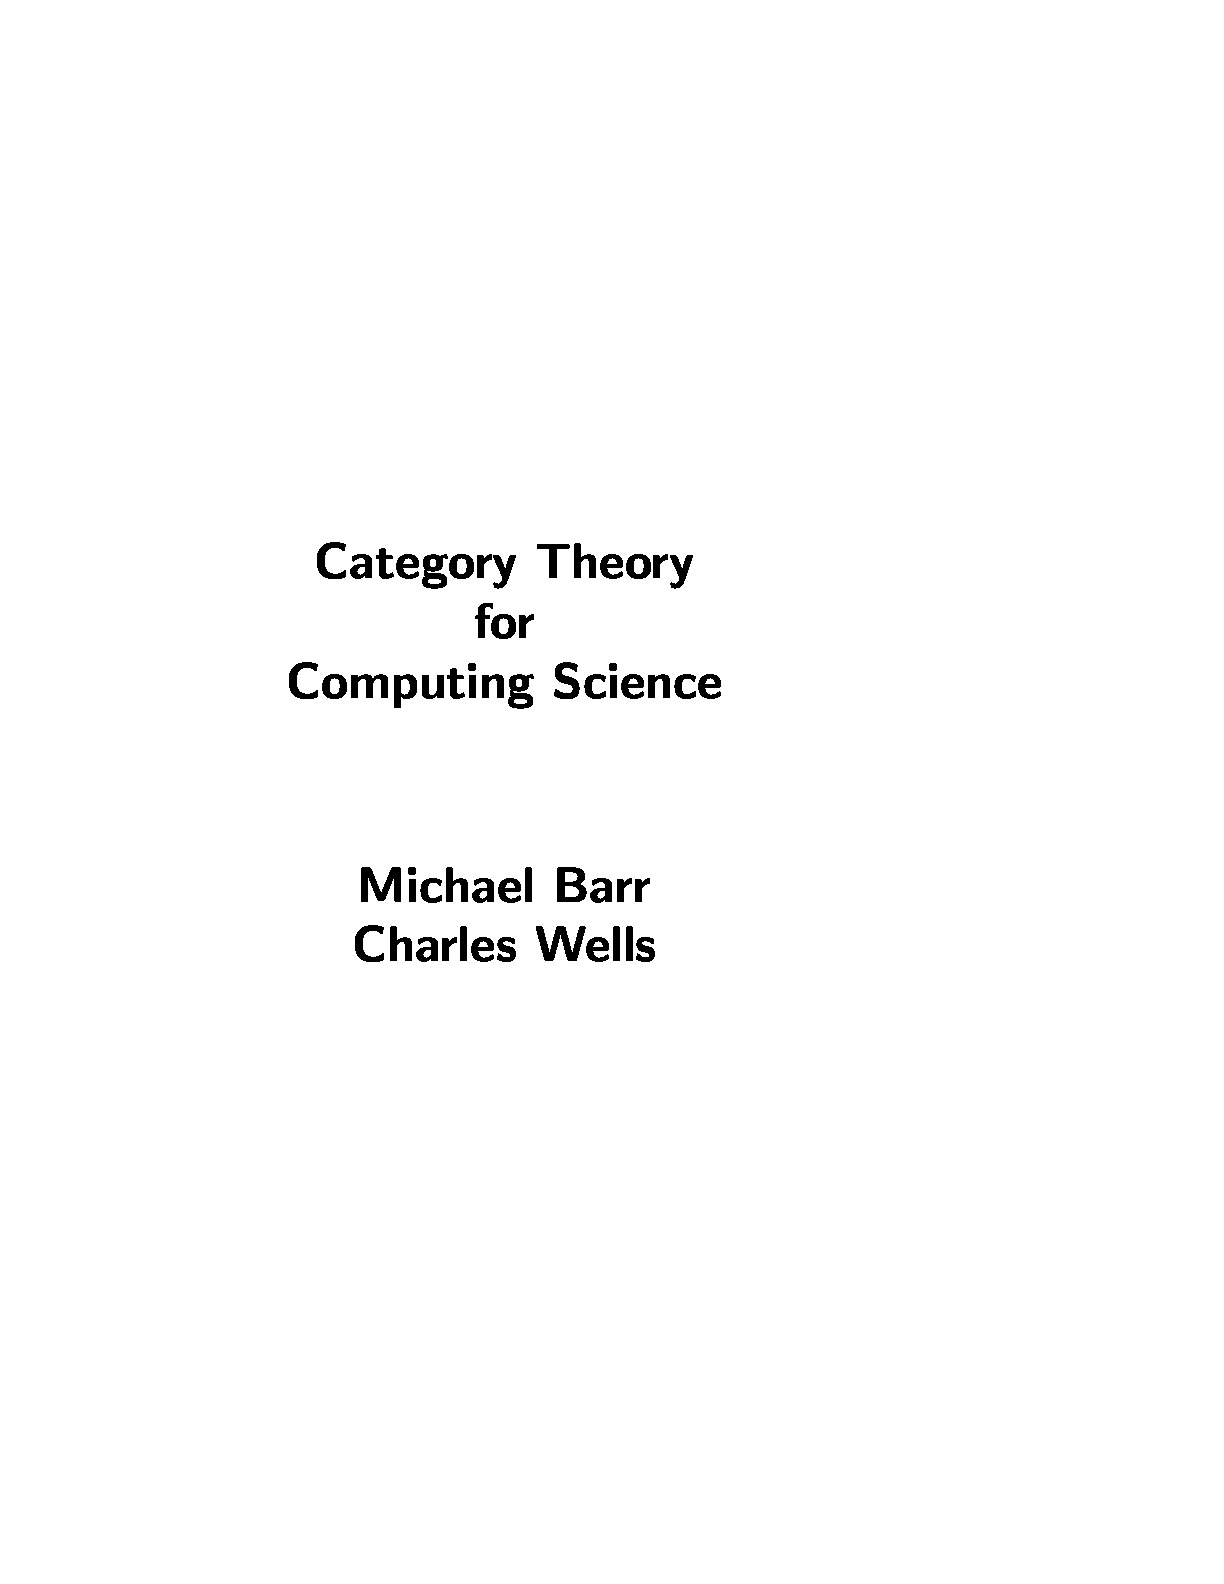 Category Theory for Computer Science